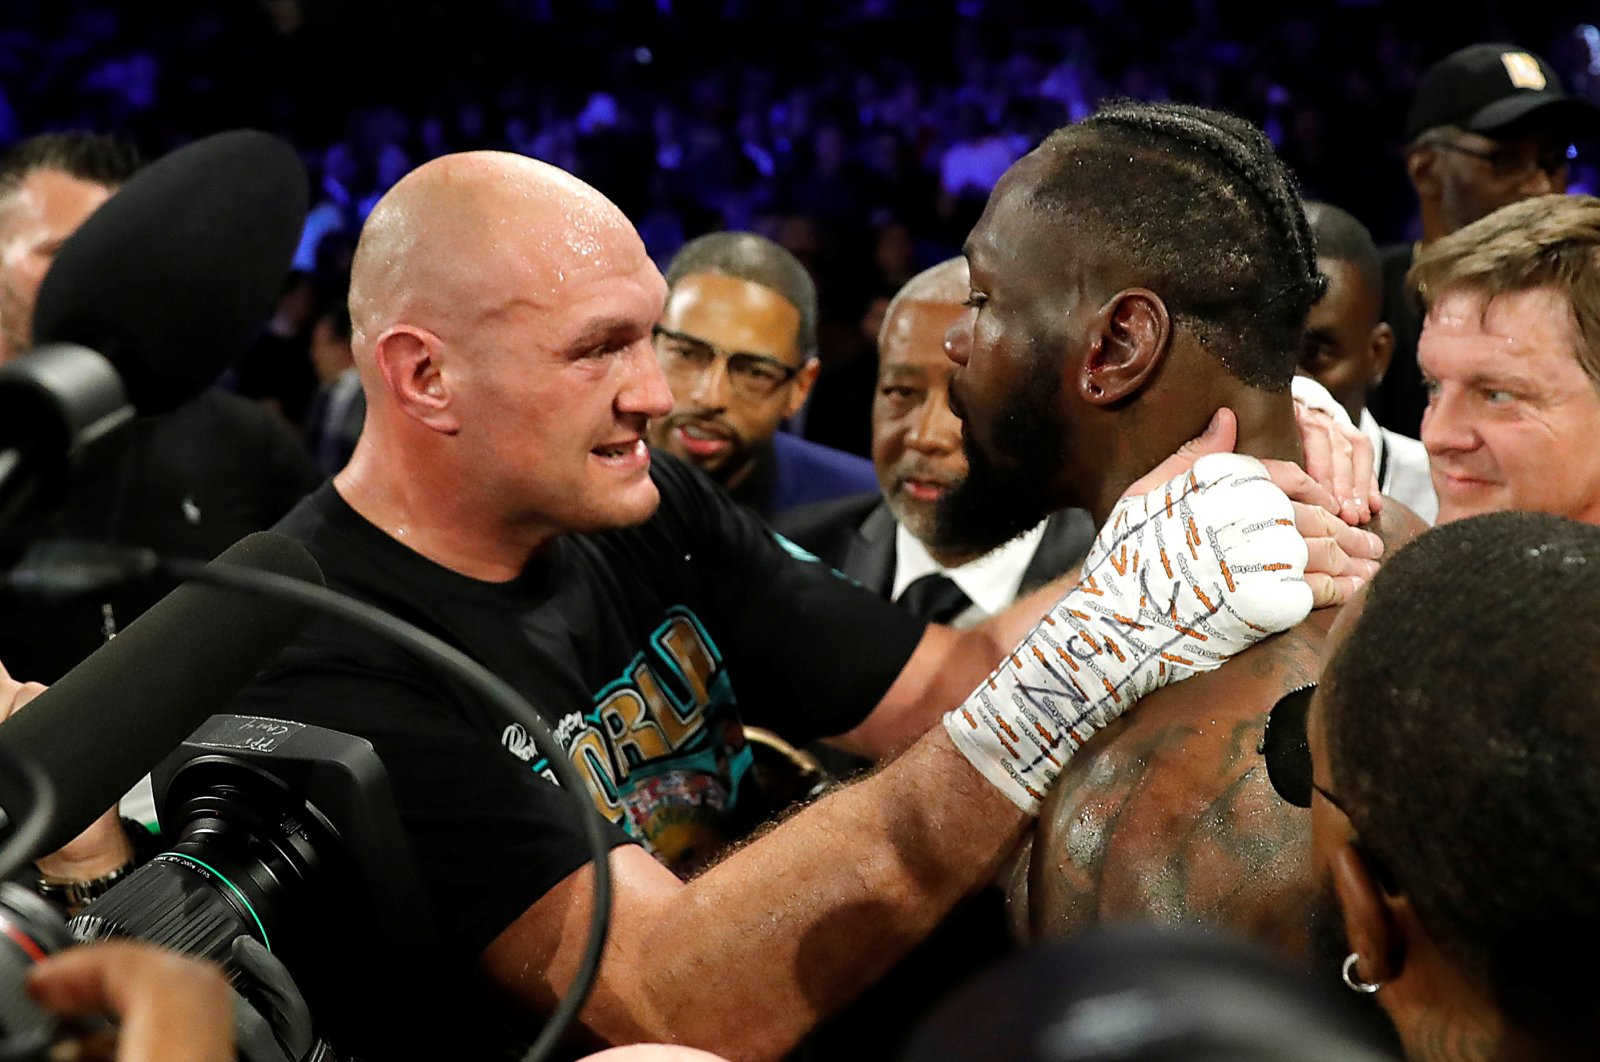 Tyson Fury consoles Deontay Wilder after winning the WBC heavyweight title bout in Las Vegas, Feb. 22, 2020. (Reuters Photo)